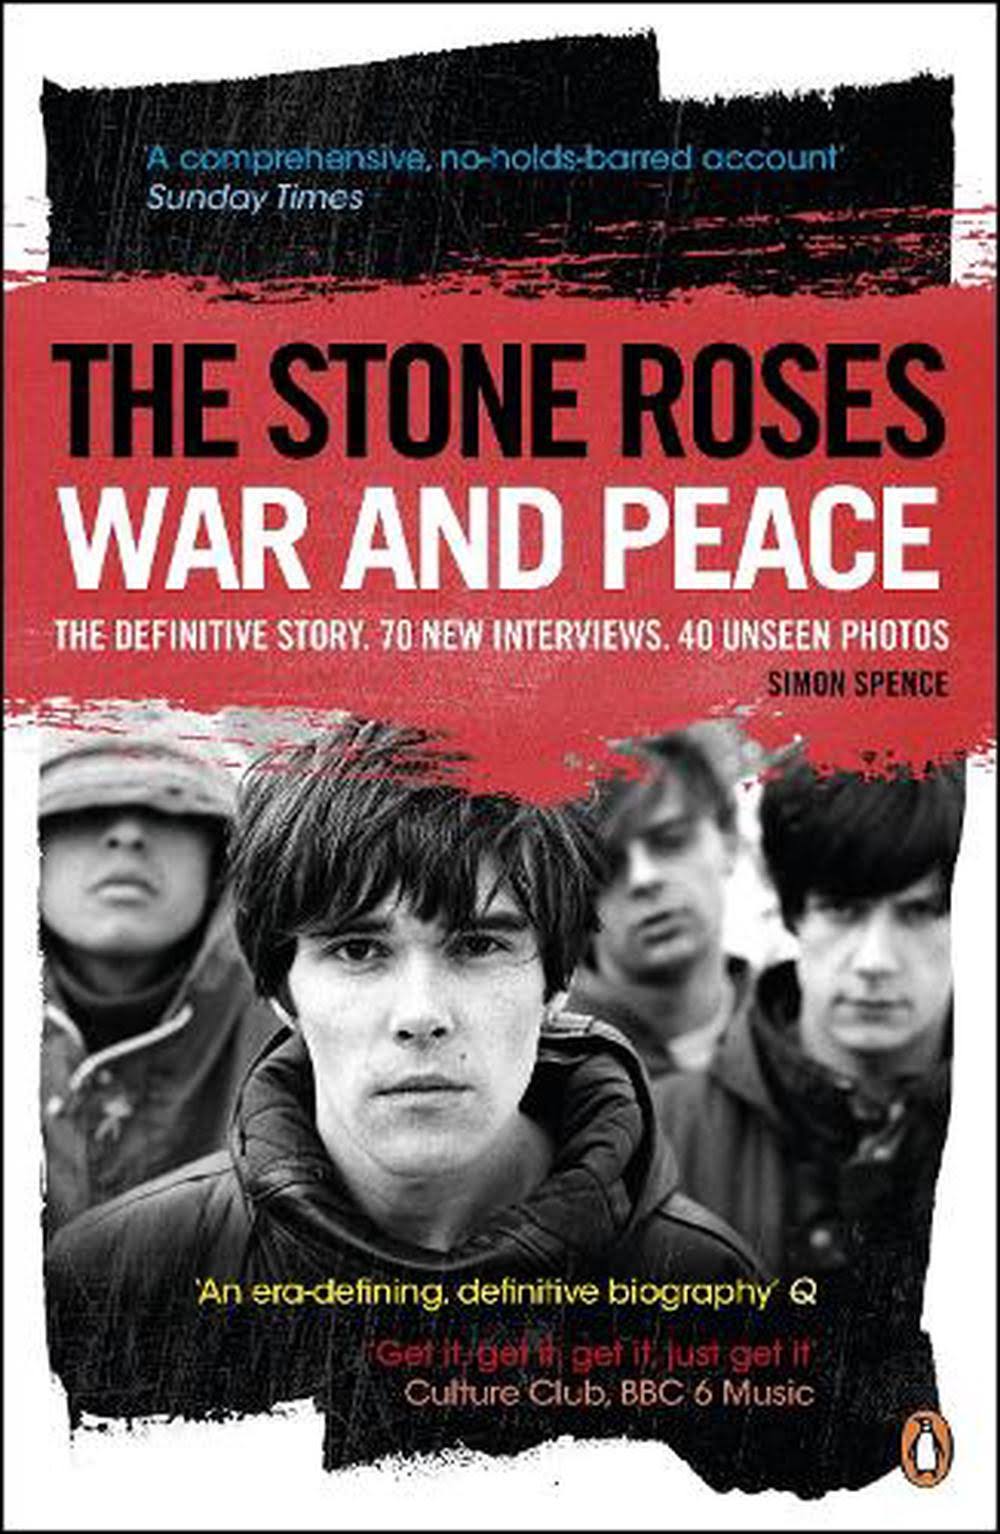 The Stone Roses: War and Peace [Book]